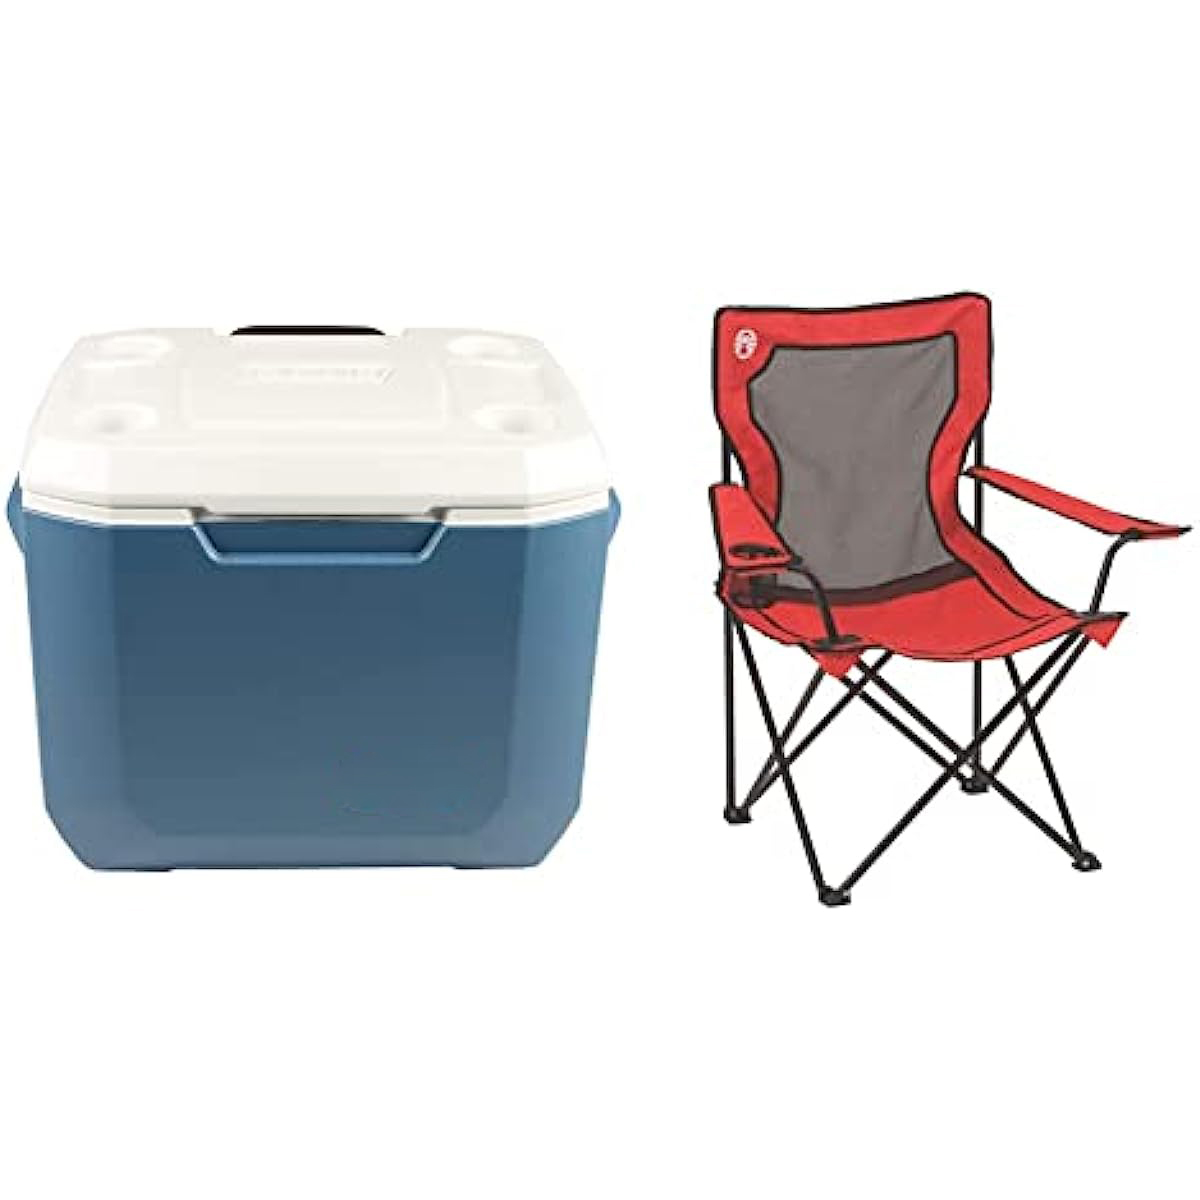 Portable Cooler with Wheels Xtreme Wheeled Cooler a compass